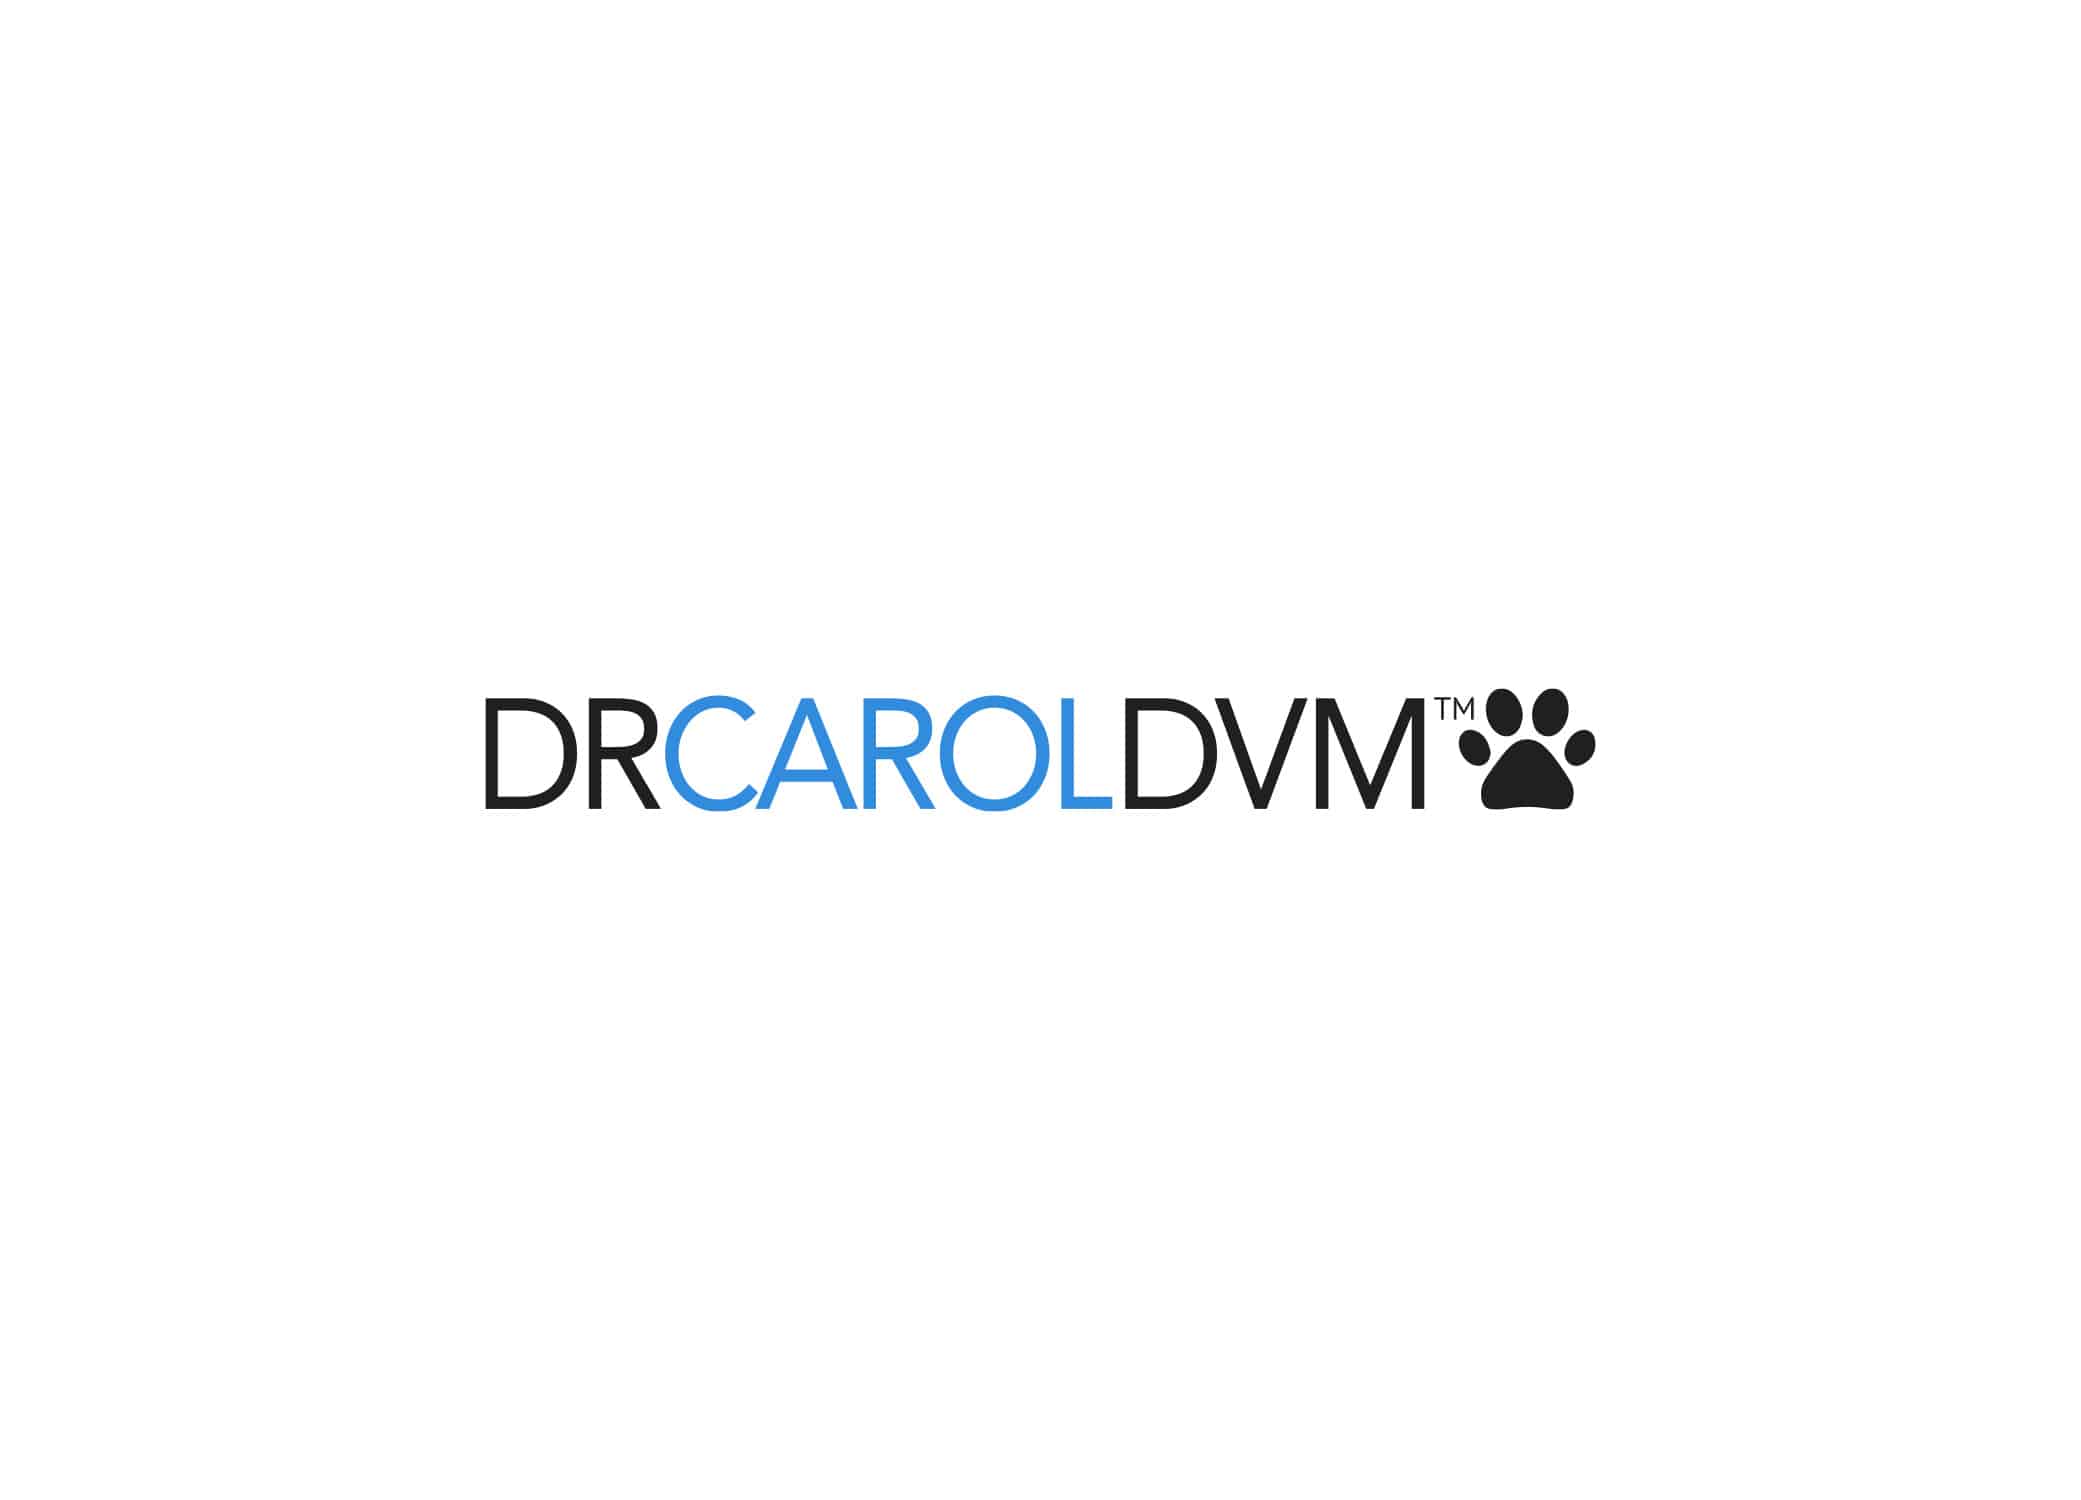 Dr. Carol DVM clinical but friendly primary brand logo design in black and blue with paw icon.